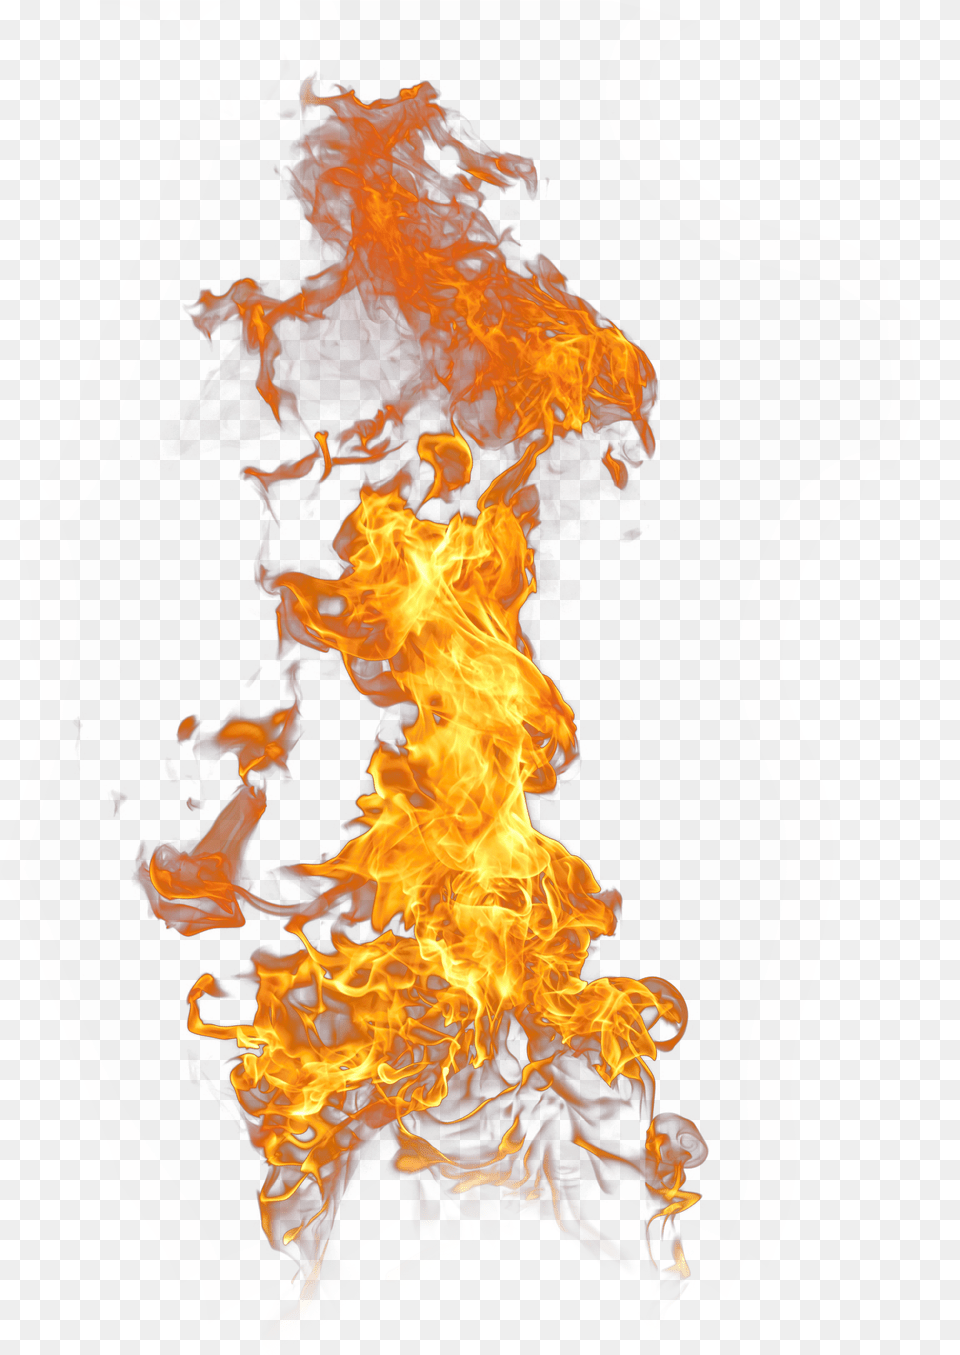 Flame Effect Clipart Hd Clipart Transparent Background Flame Effects, Fire, Bonfire Free Png Download